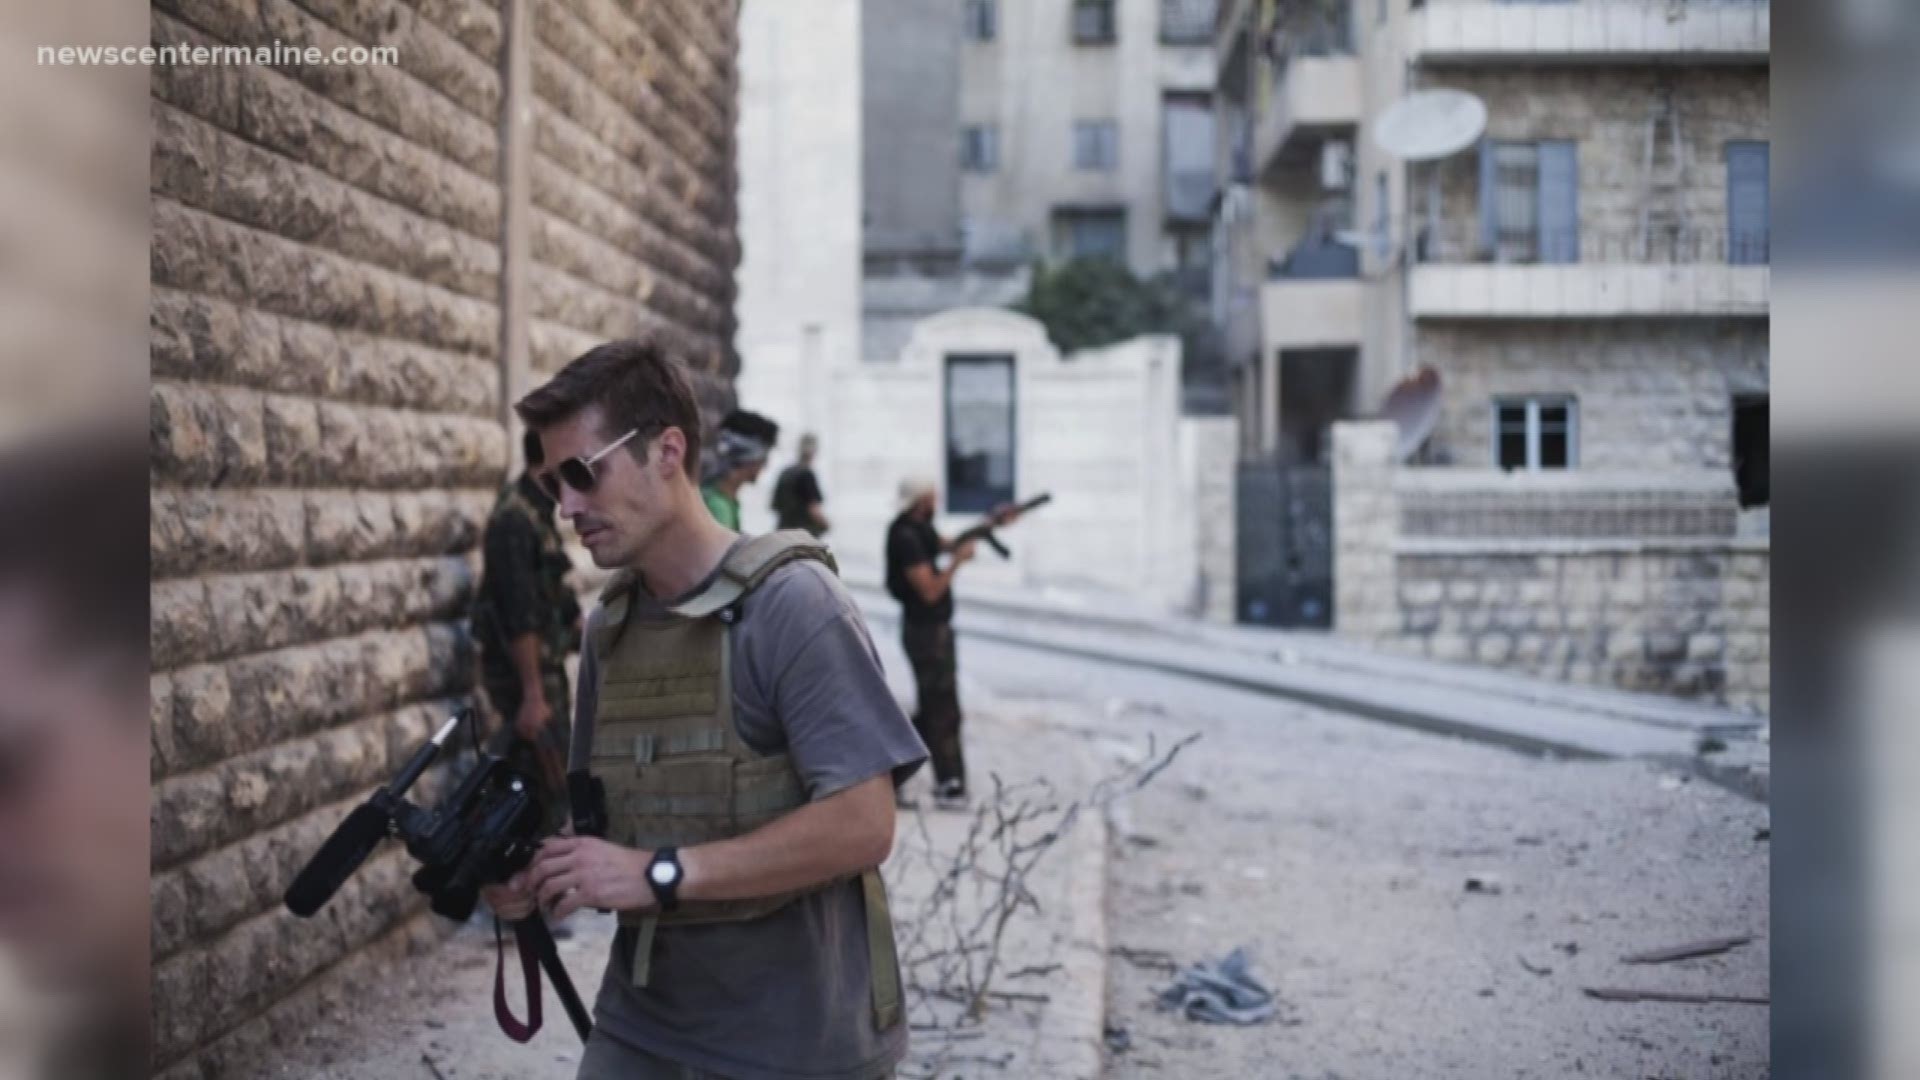 Ceremony to be held for slain NH native James Foley